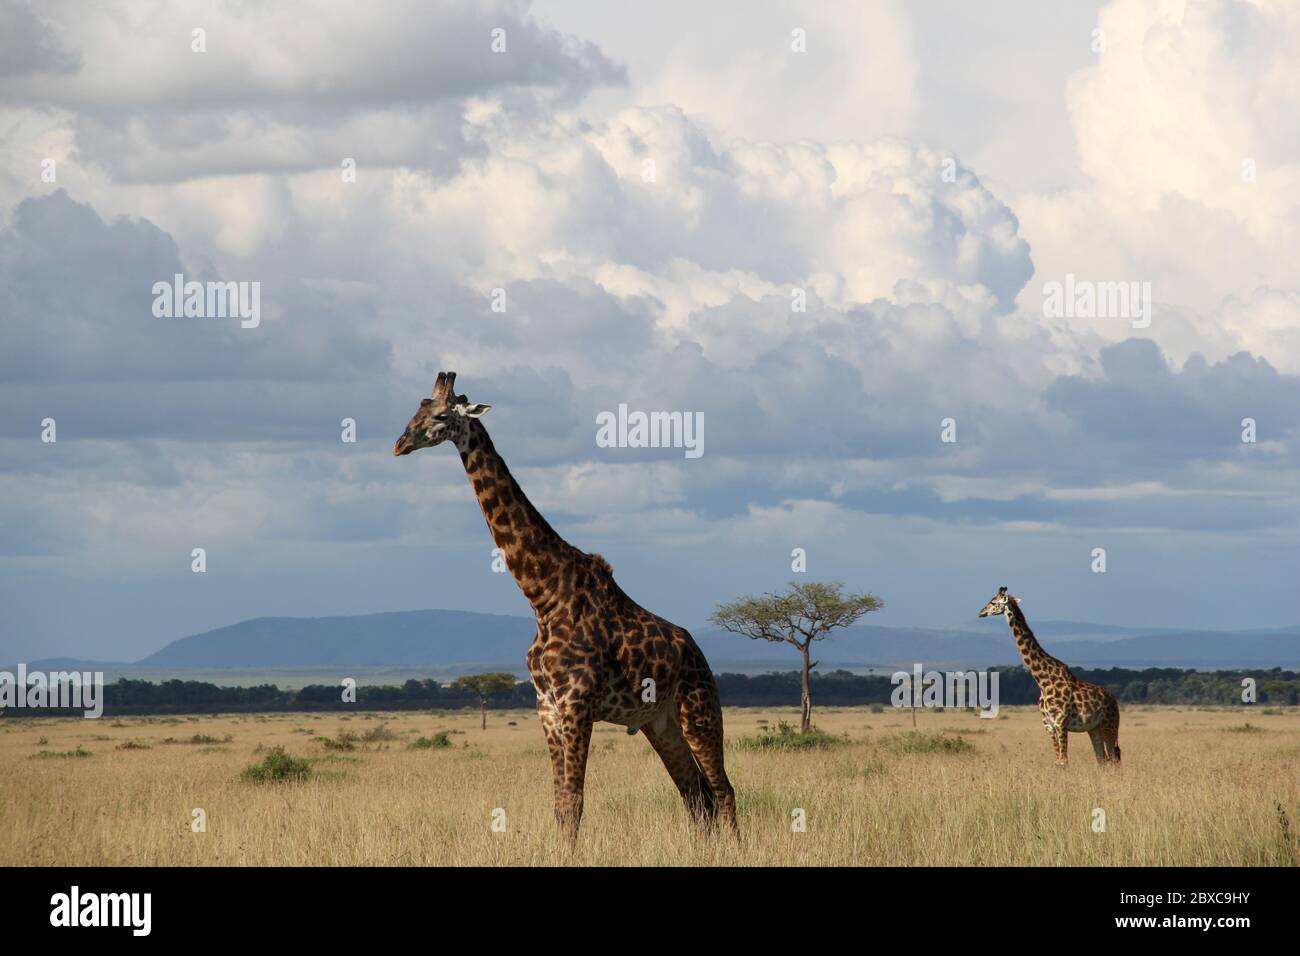 Panoramic view of the Kenyan savannah, giraffes move peacefully through the dry grasslands, in the background impressive cloud formations Stock Photo